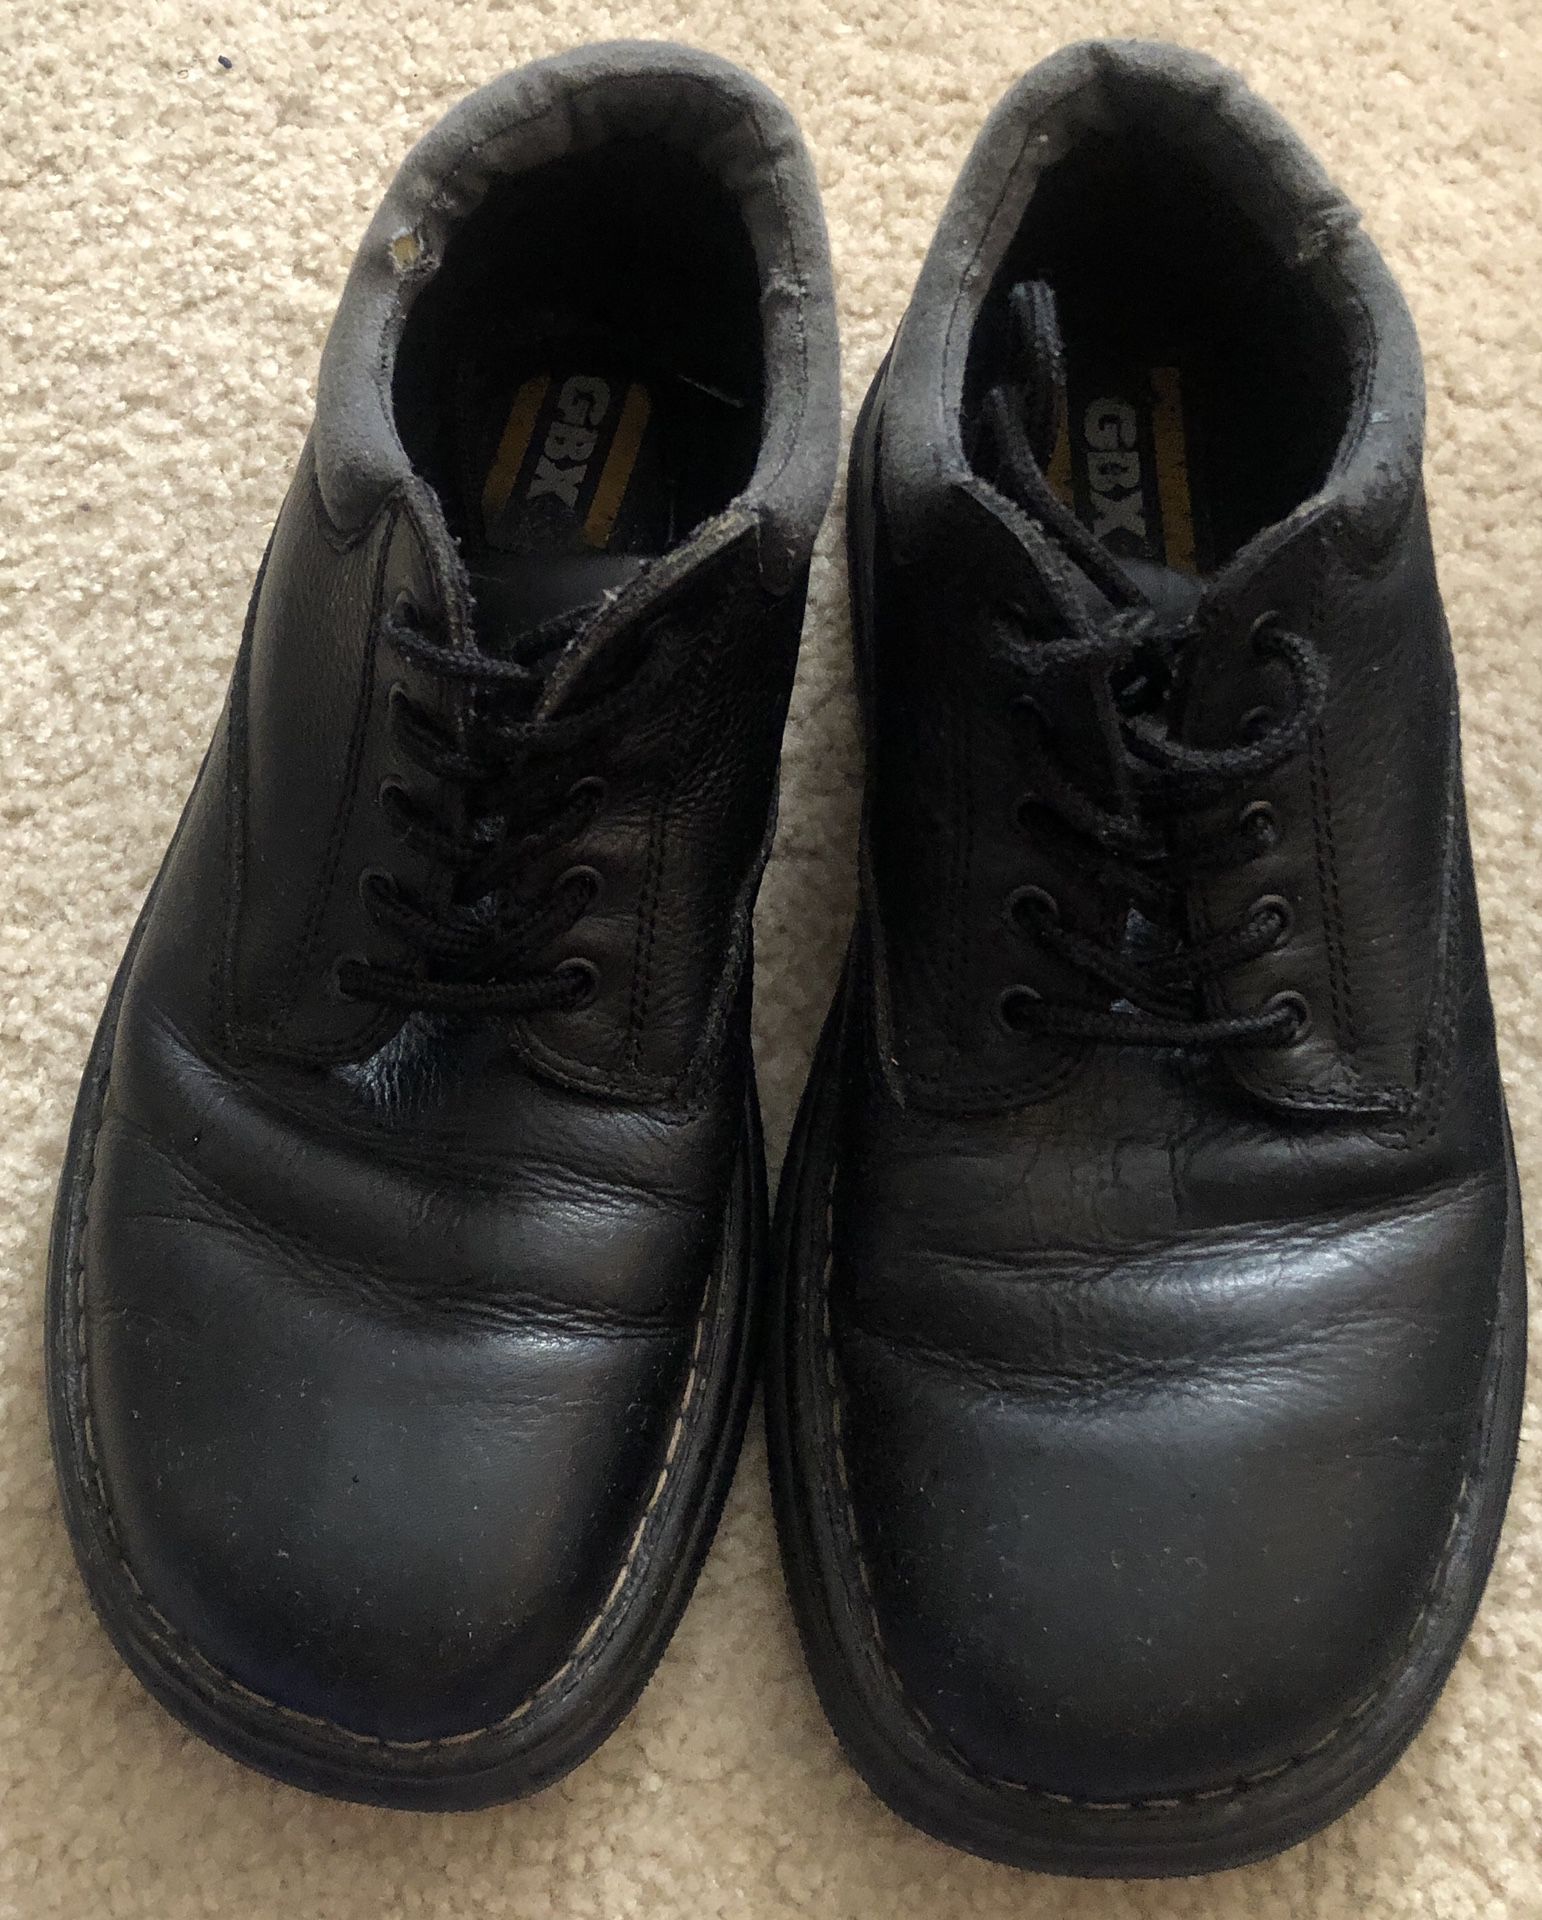 GBX Men’s Black Leather Work Boots - Size 11 1/2